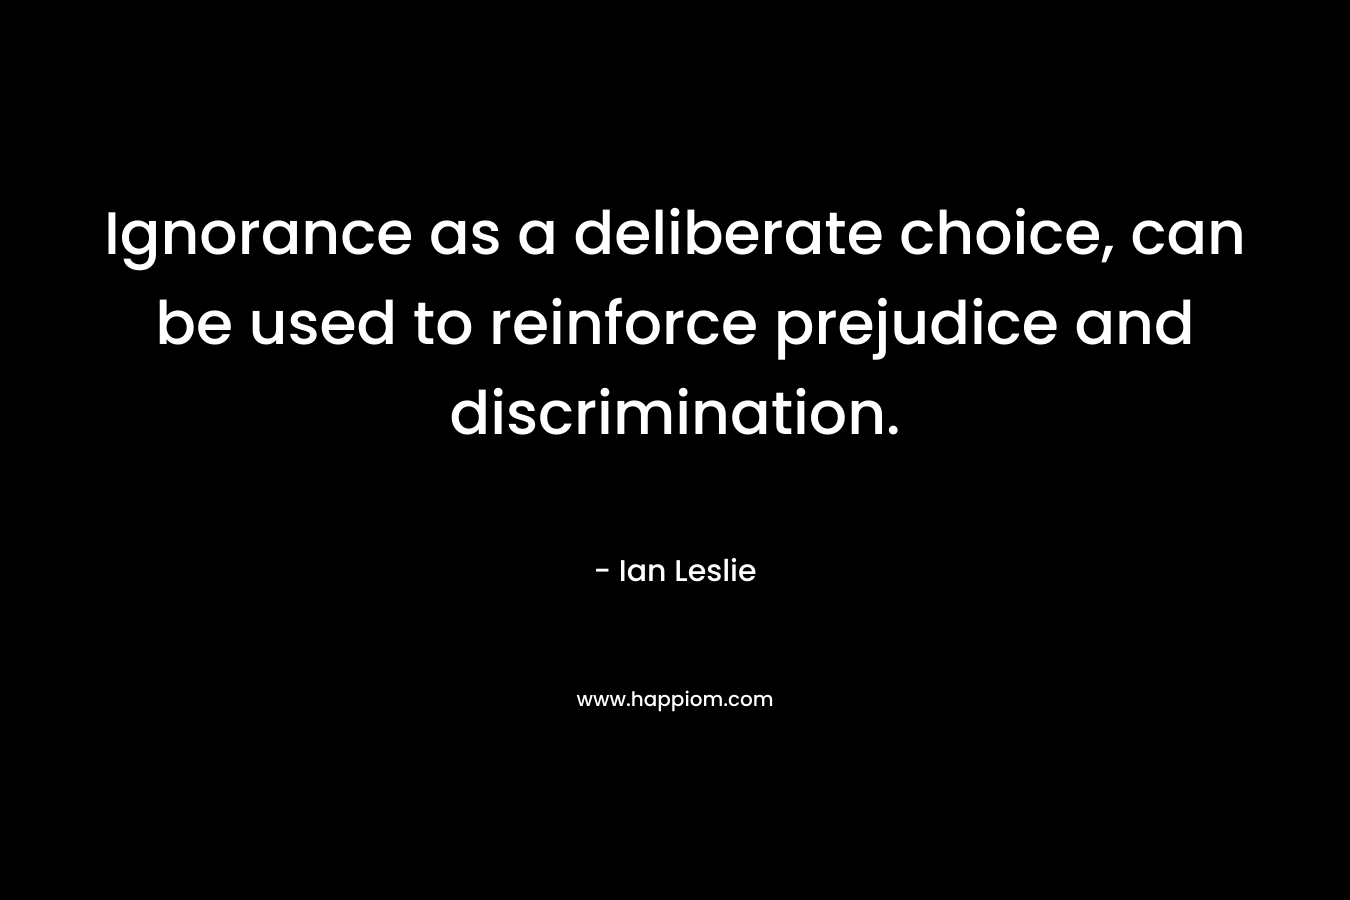 Ignorance as a deliberate choice, can be used to reinforce prejudice and discrimination. – Ian Leslie